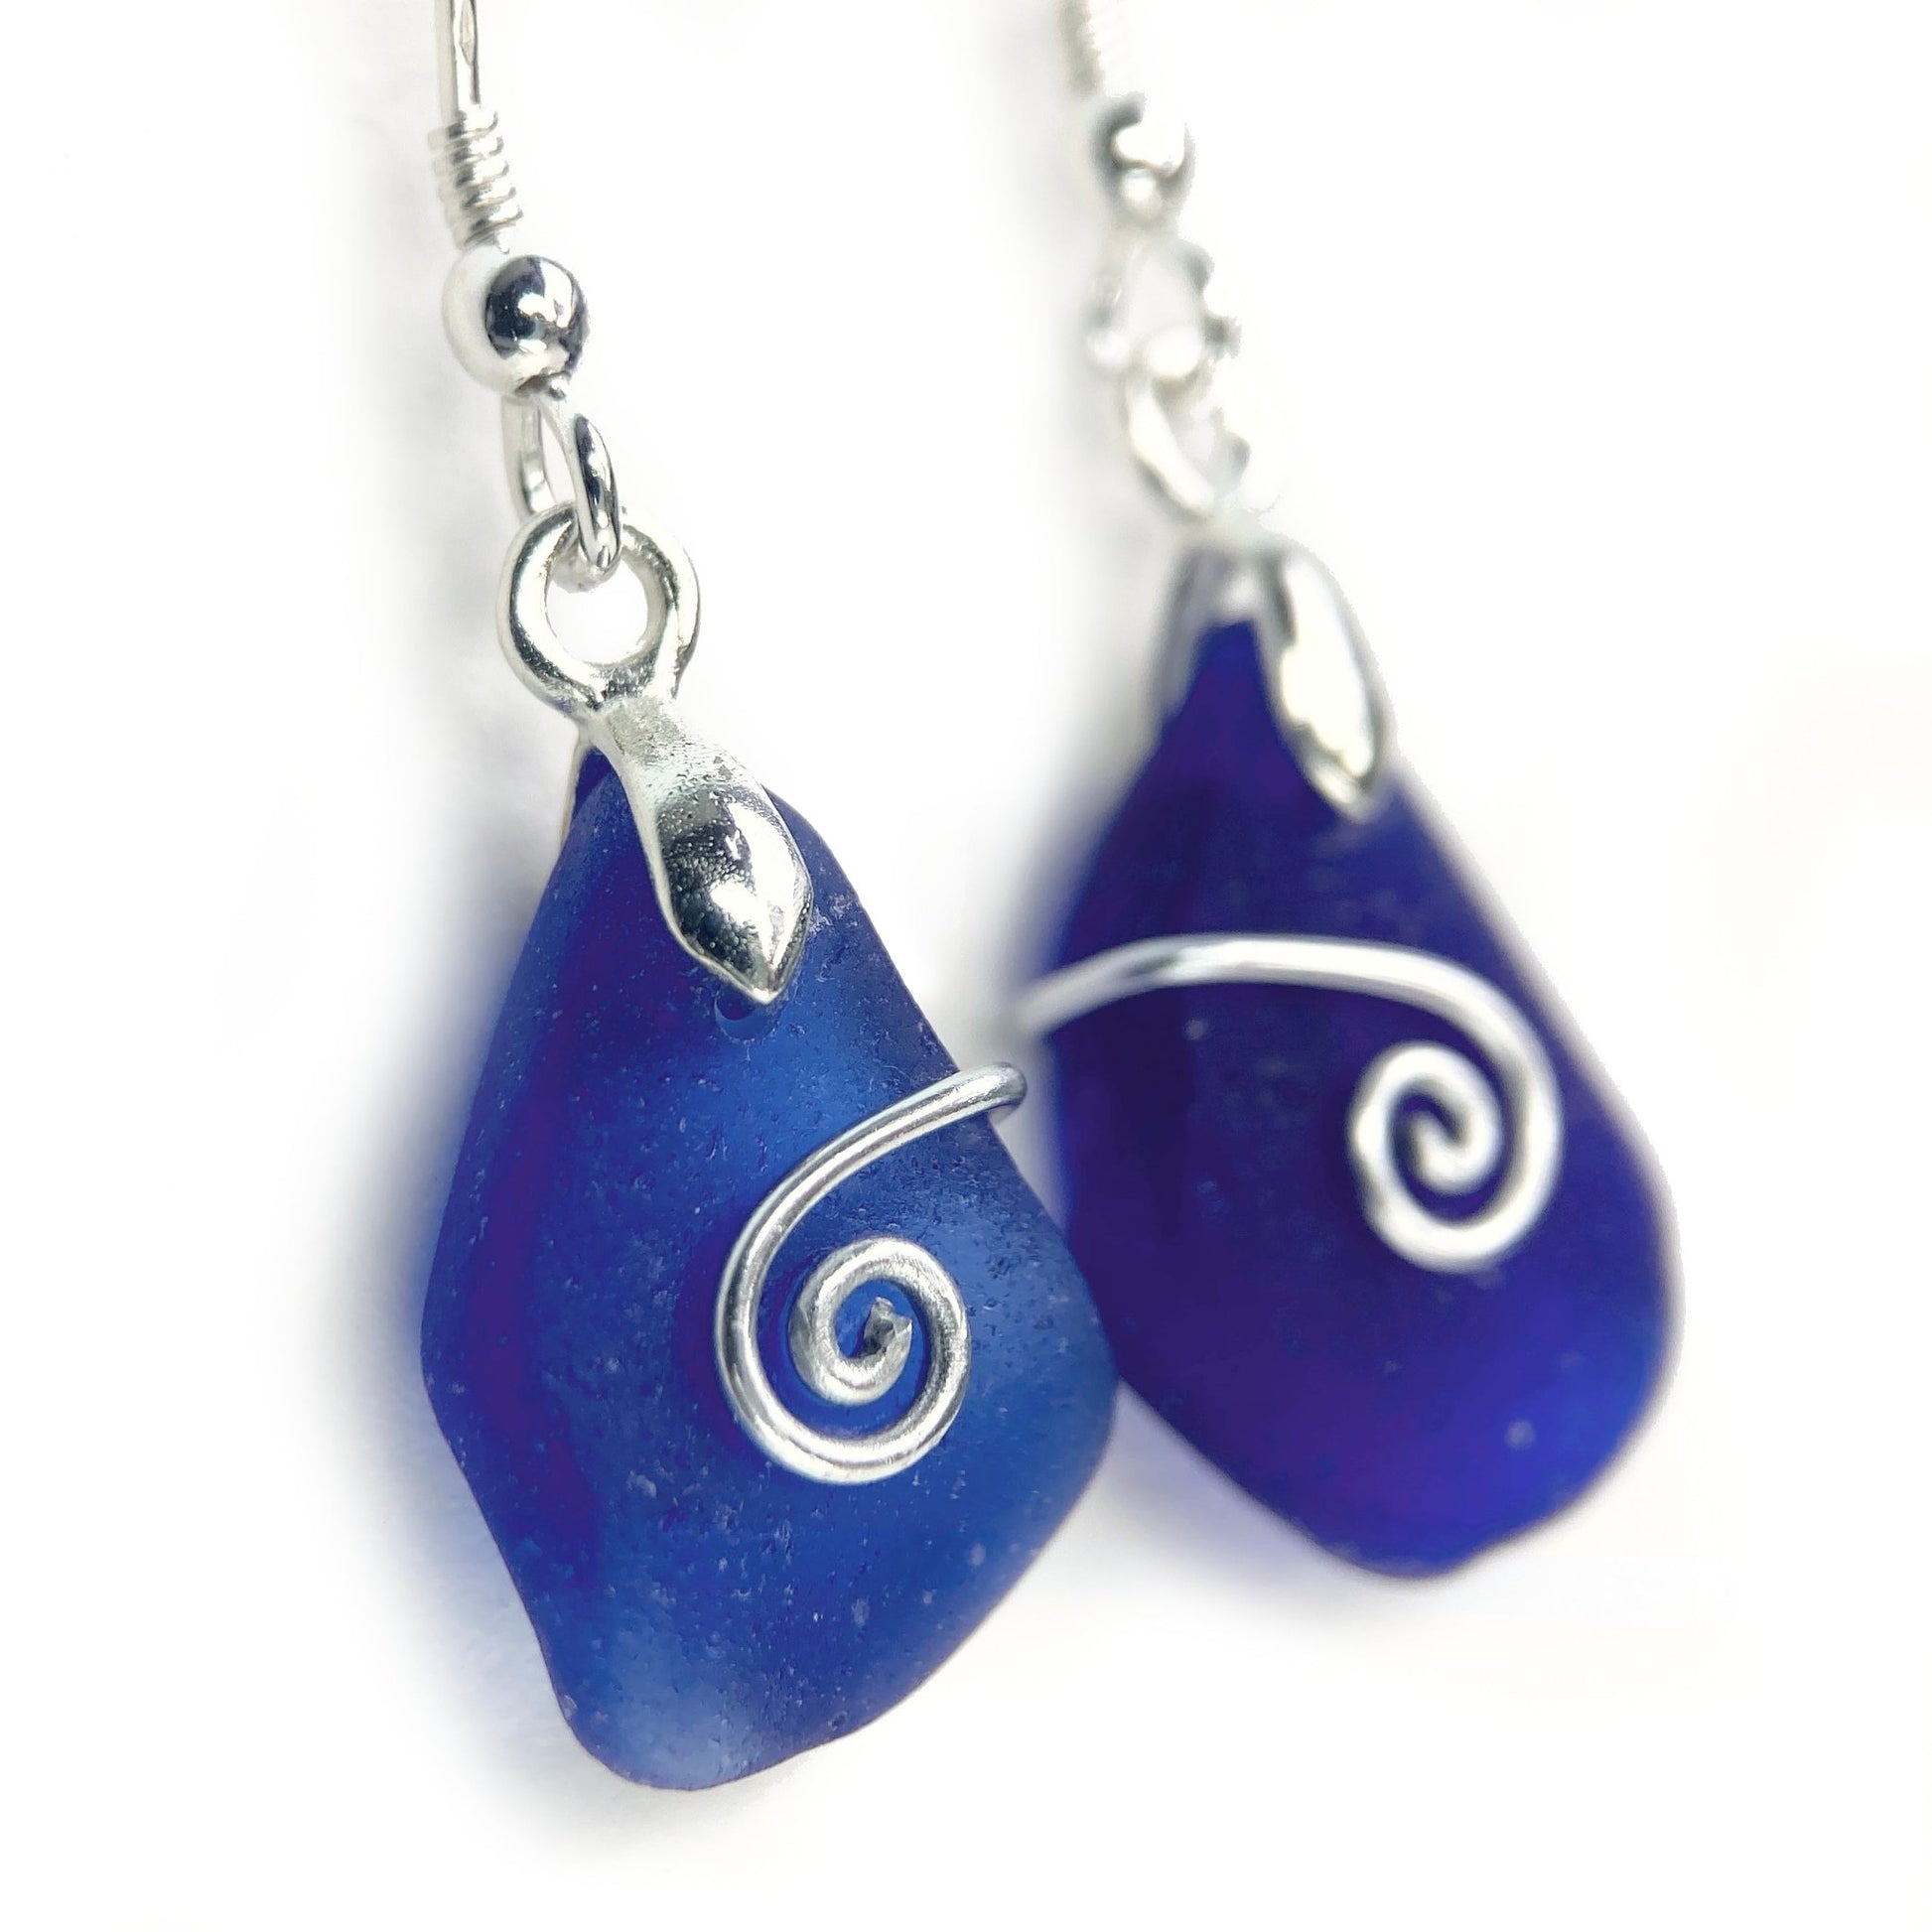 Sea Glass Earrings - Sterling Silver - Cobalt Blue Celtic Wire Wrapped Jewellery - East Neuk Beach Crafts